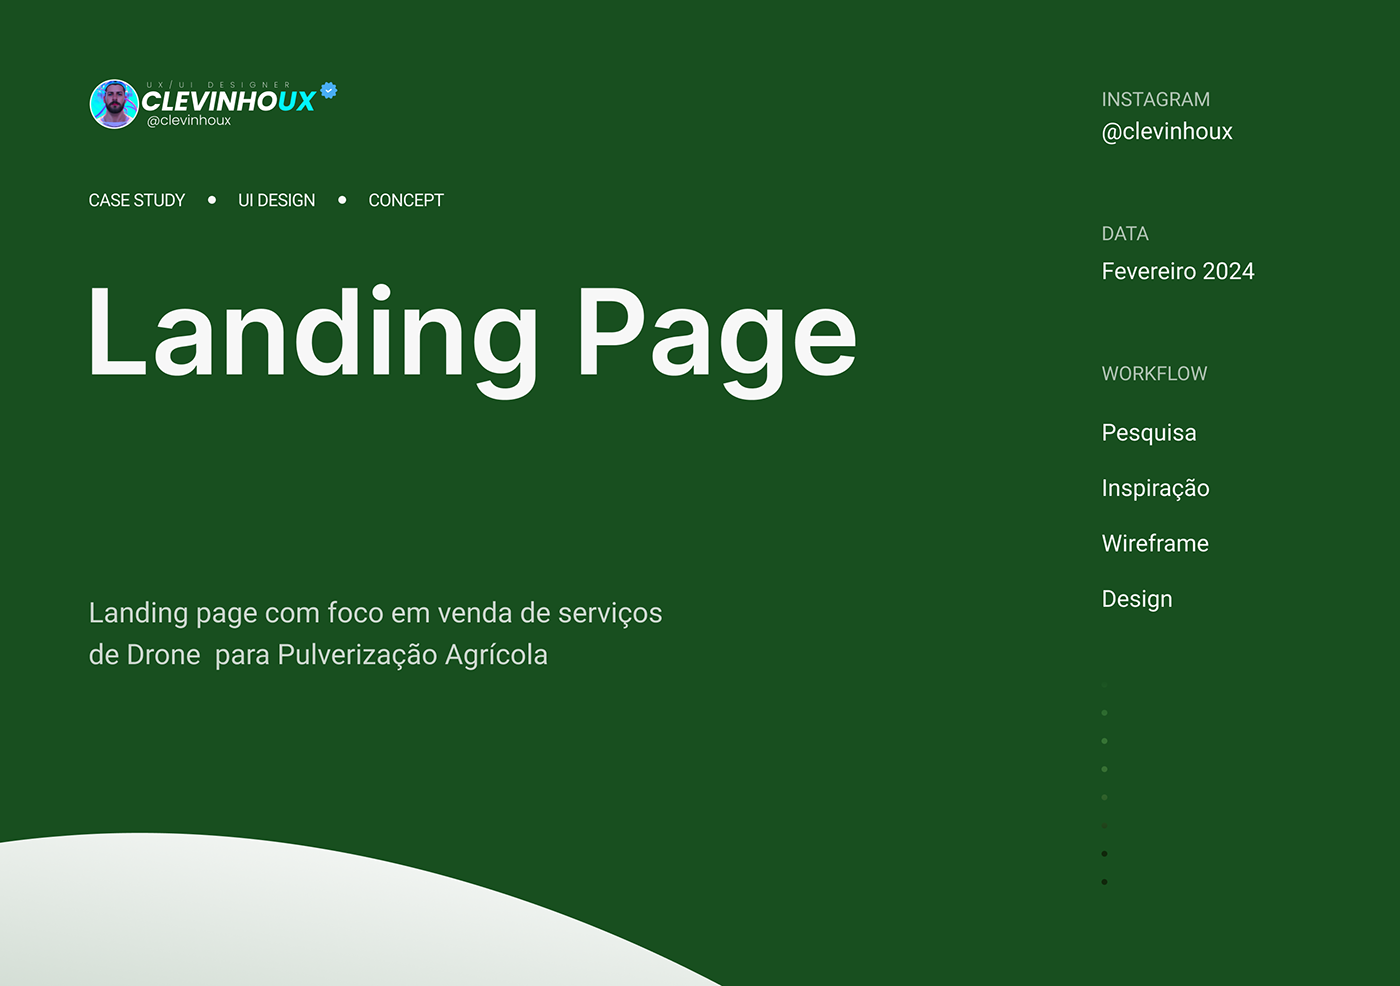 landing page ux brand identity Webdesign elementor pro Layout concept Mobile app user experience Web